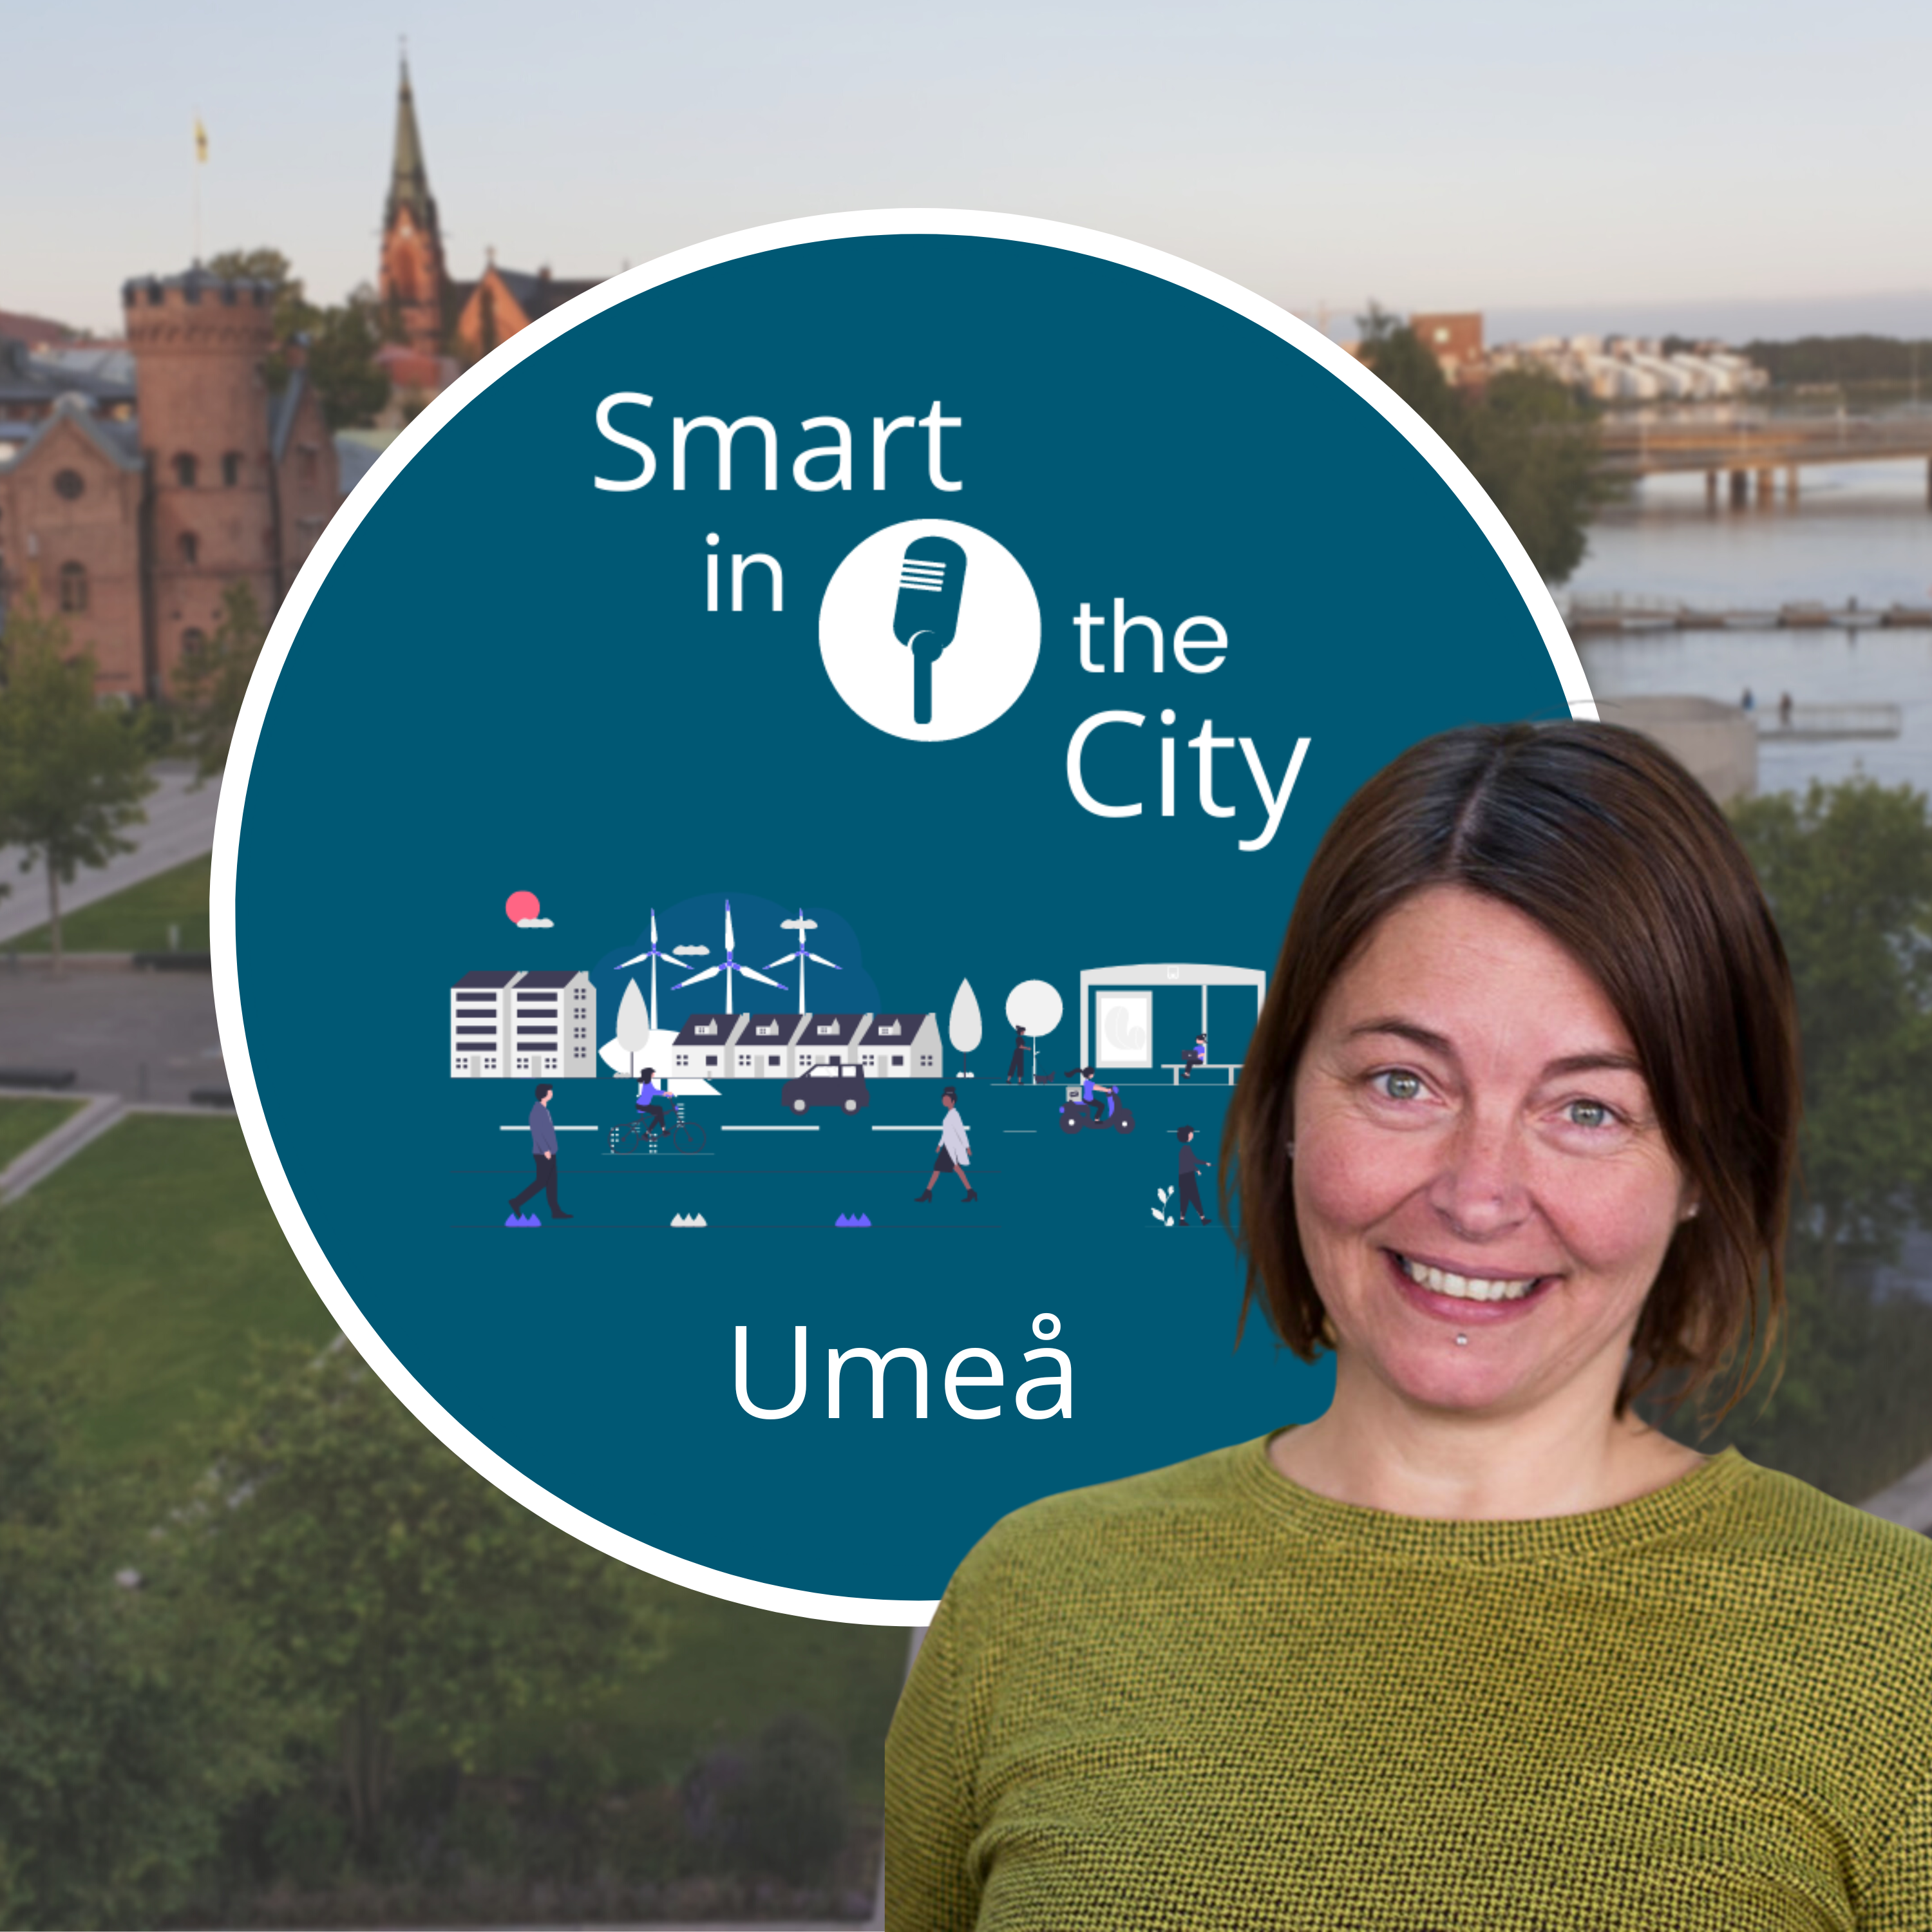 #15 Umeå: "You Don't Need Technology to be Smart"